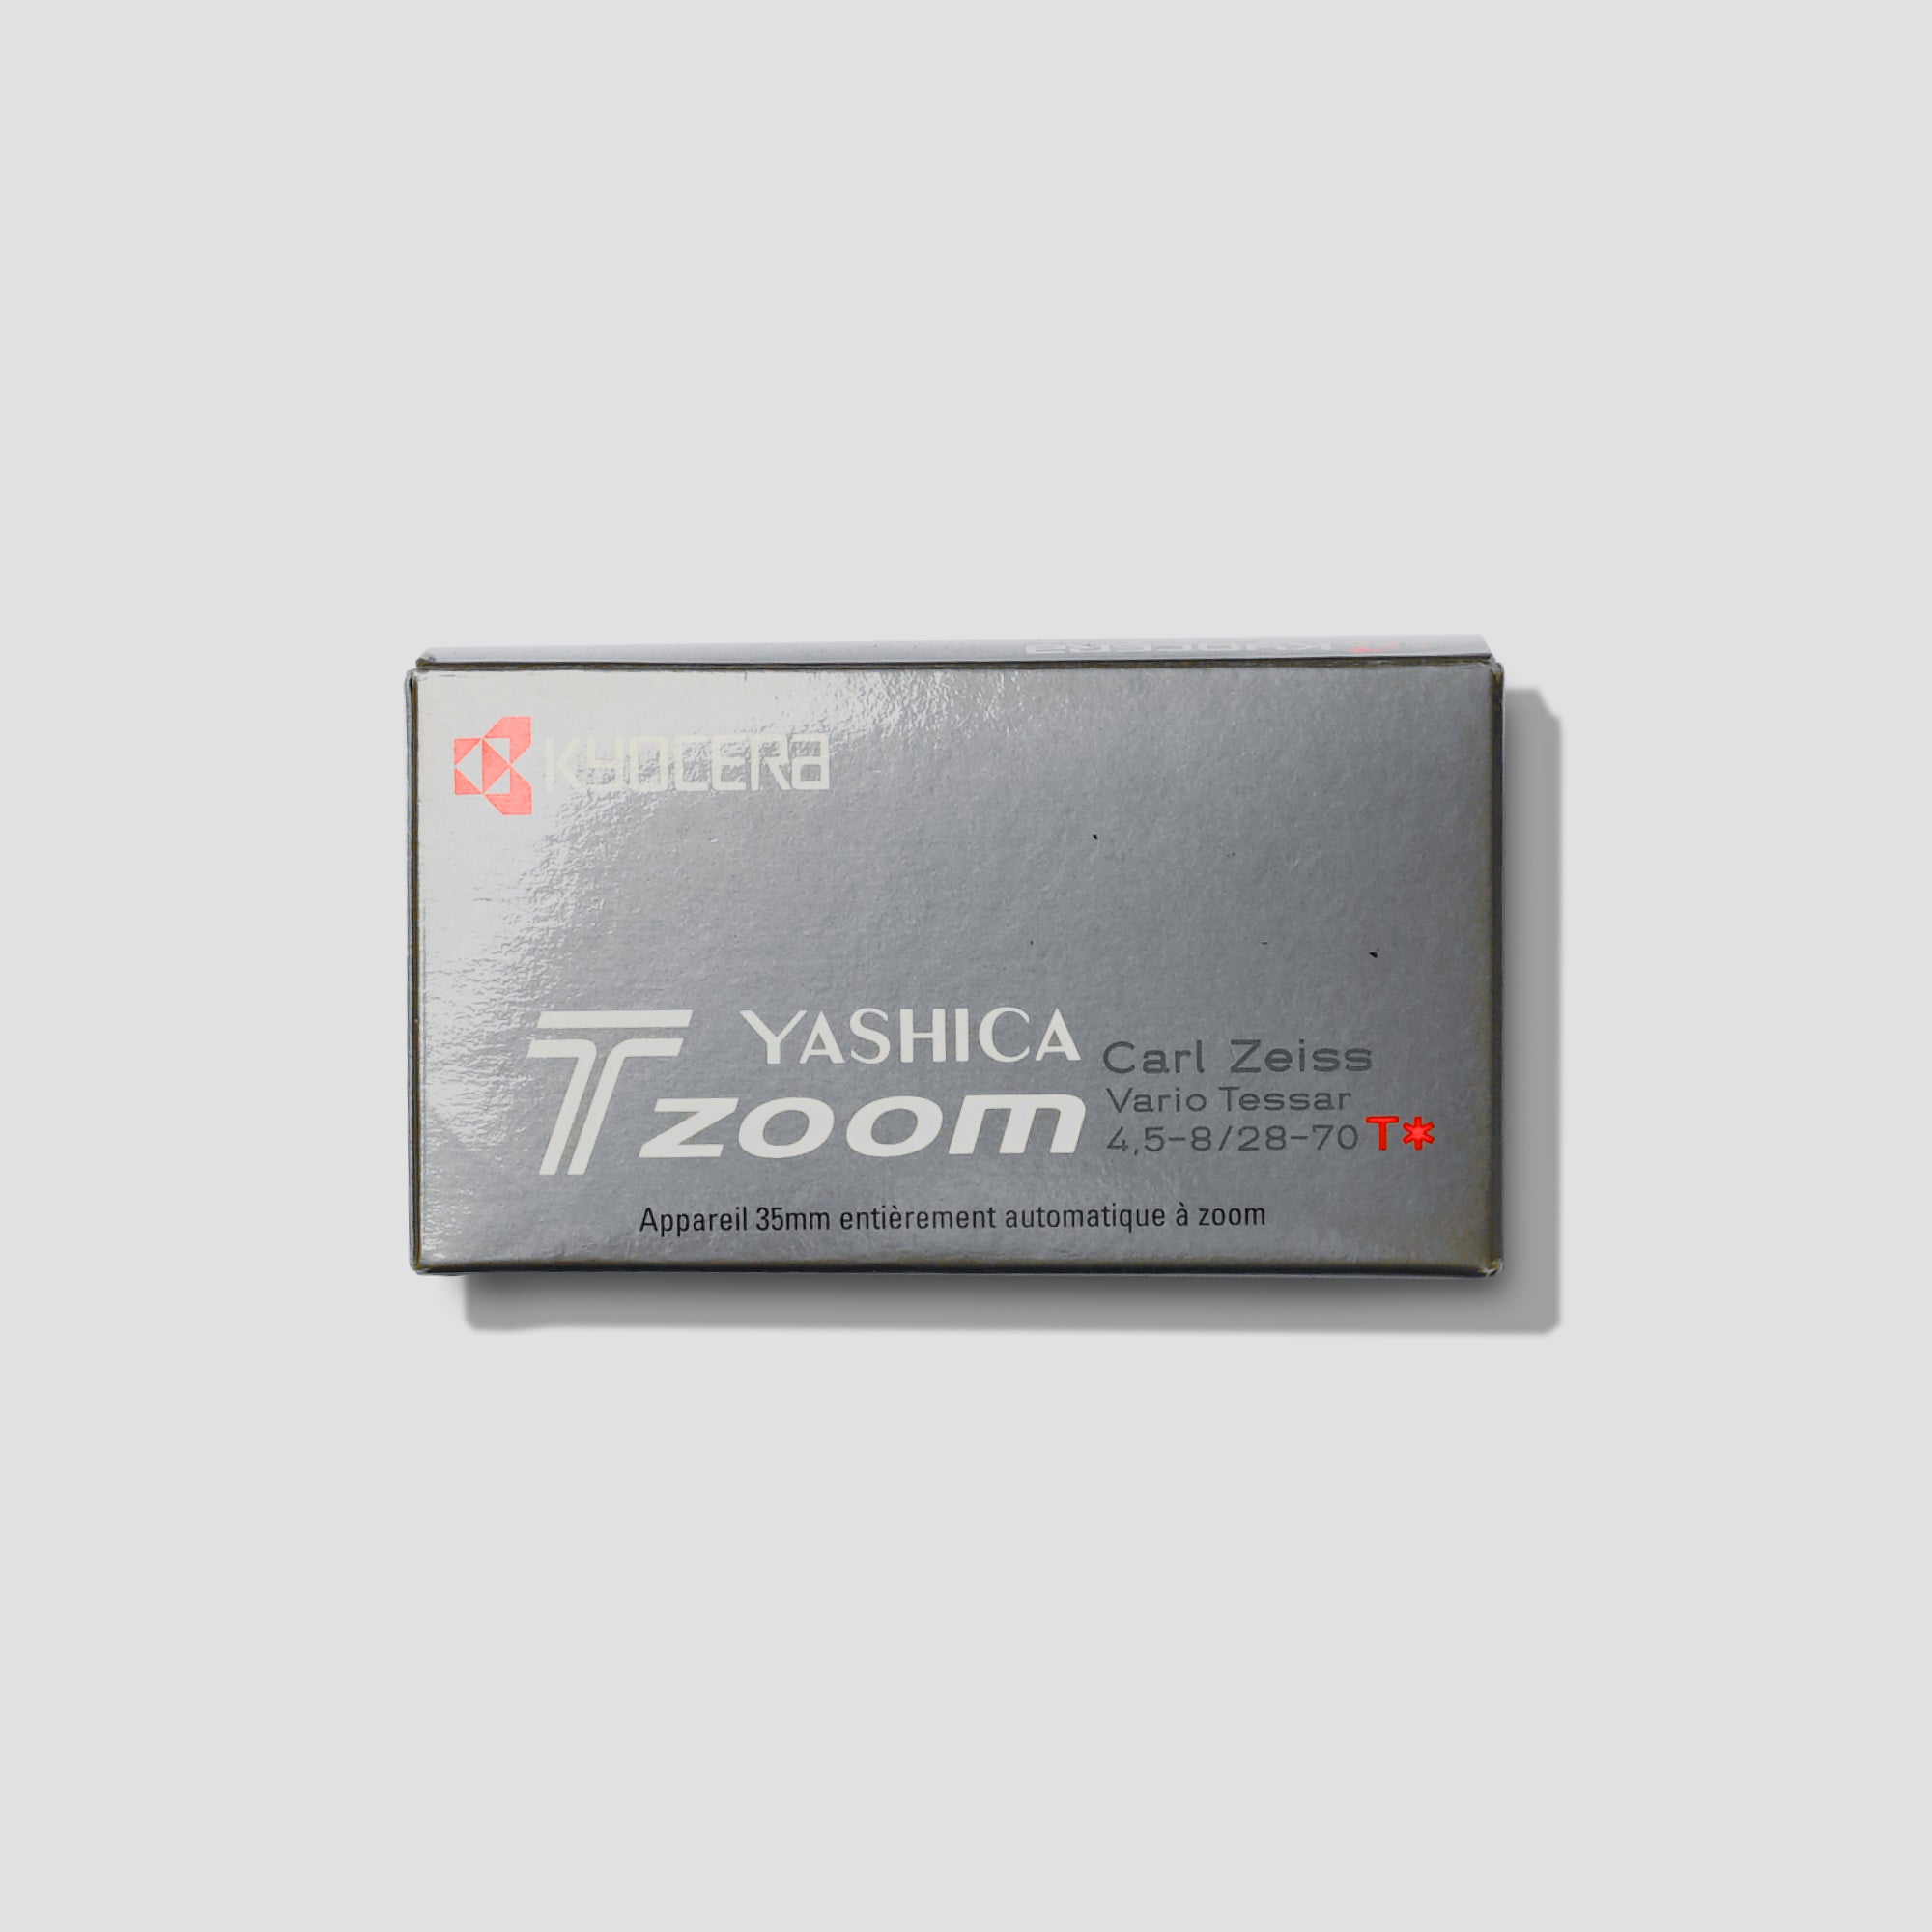 Buy Yashica T4 Zoom now at Analogue Amsterdam